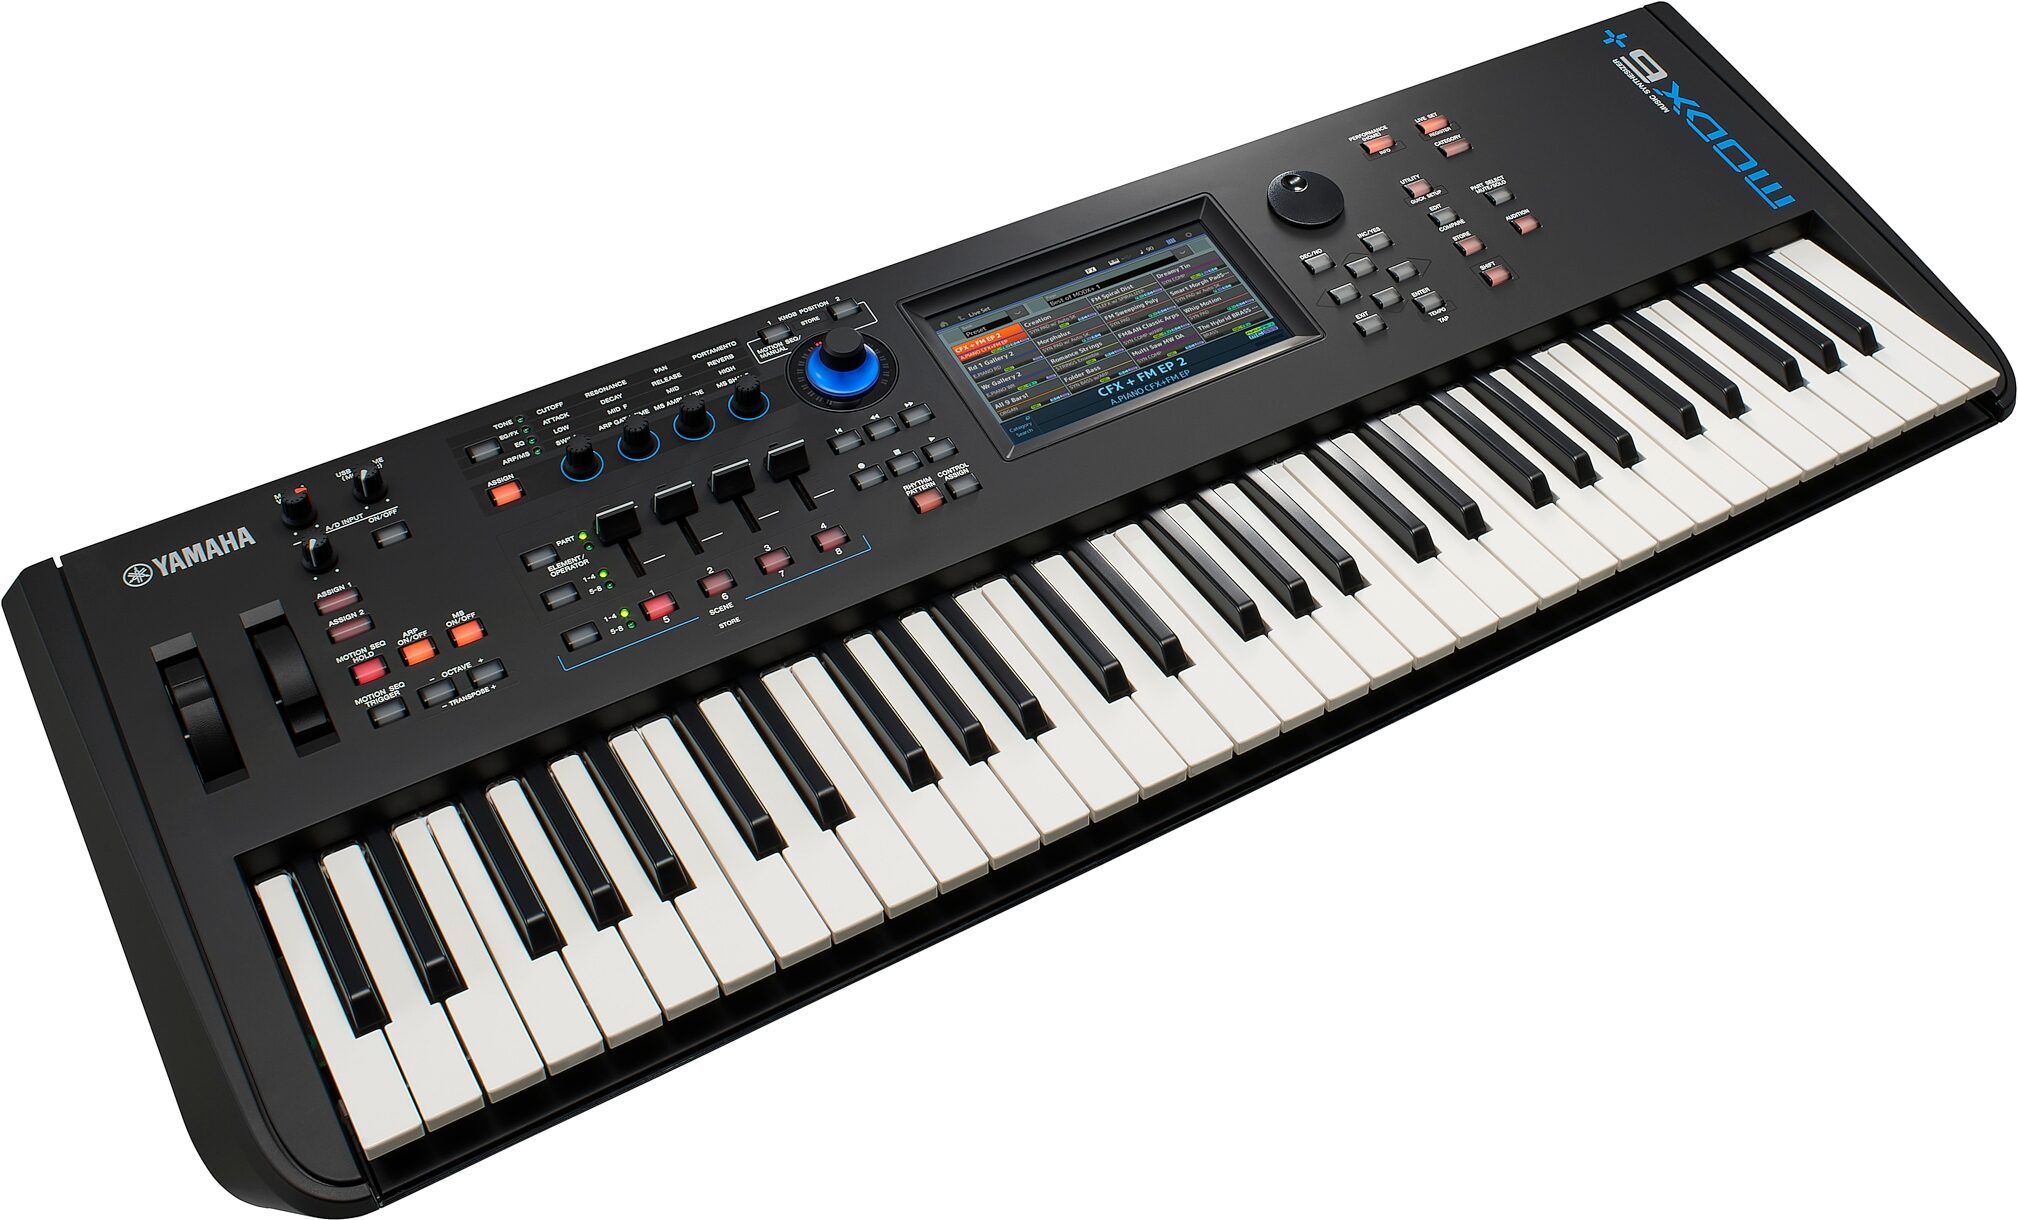 FC5 - Overview - Accessories - Synthesizers & Music Production Tools -  Products - Yamaha USA